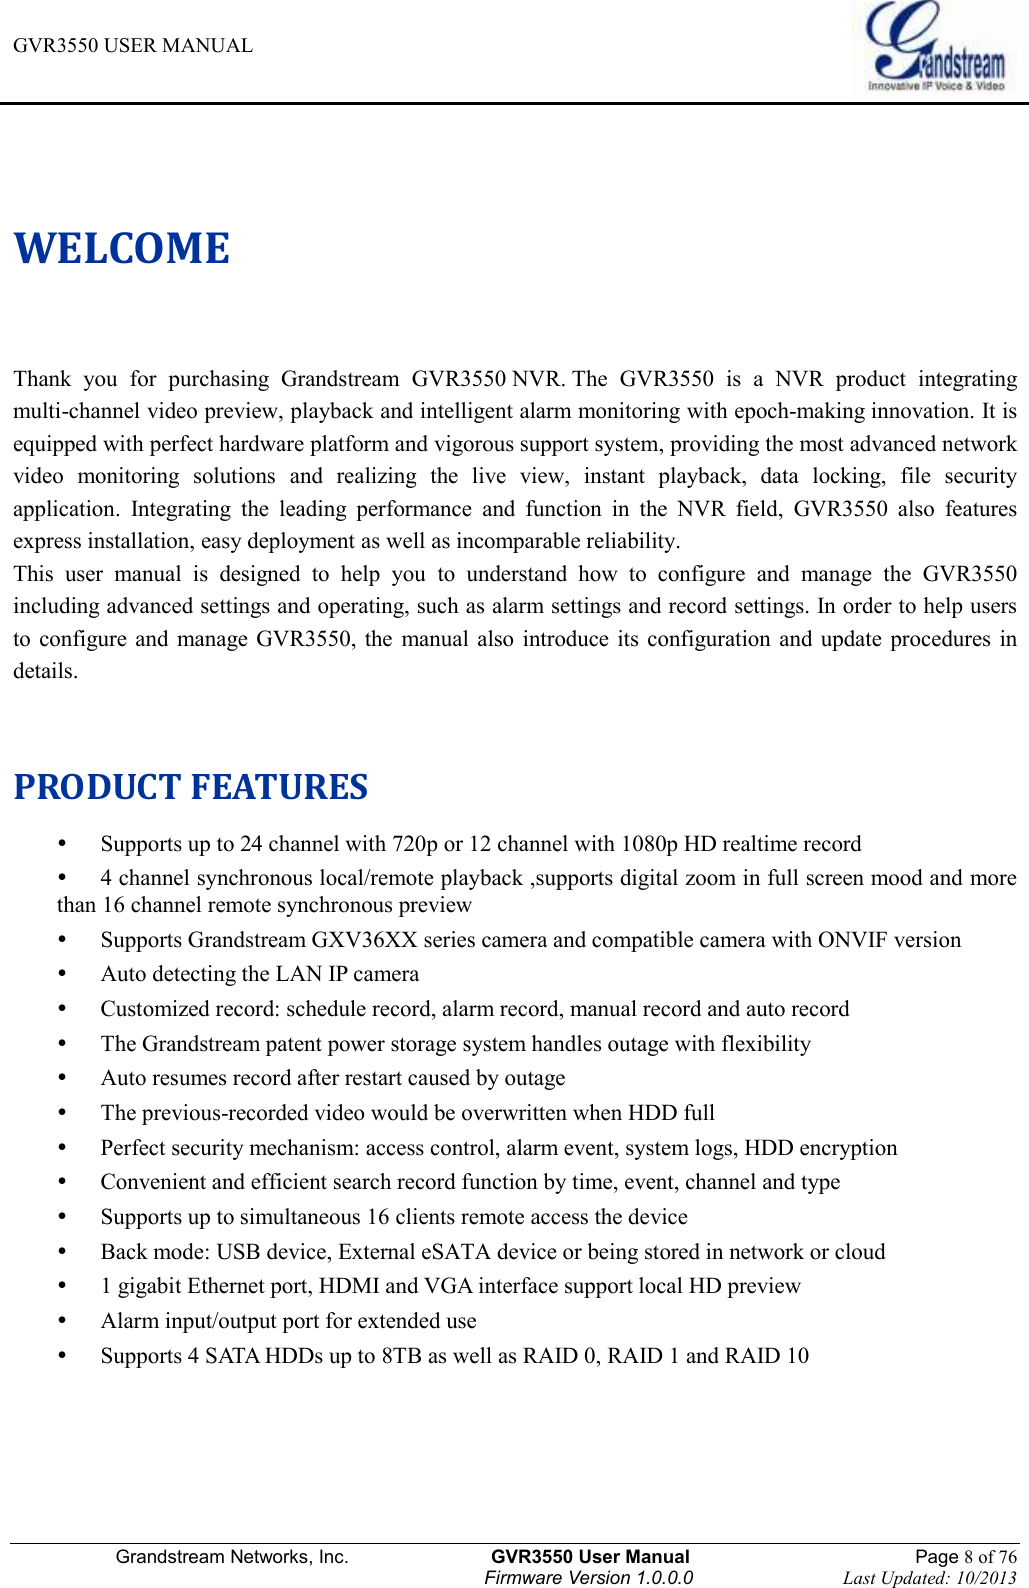 GVR3550 USER MANUAL   Grandstream Networks, Inc.                    GVR3550 User Manual                                                Page 8 of 76 Firmware Version 1.0.0.0                                Last Updated: 10/2013  WELCOME Thank  you  for  purchasing  Grandstream  GVR3550 NVR. The  GVR3550  is  a  NVR  product  integrating multi-channel video preview, playback and intelligent alarm monitoring with epoch-making innovation. It is equipped with perfect hardware platform and vigorous support system, providing the most advanced network video  monitoring  solutions  and  realizing  the  live  view,  instant  playback,  data  locking,  file  security application.  Integrating  the  leading  performance  and  function  in  the  NVR  field,  GVR3550  also  features express installation, easy deployment as well as incomparable reliability. This  user  manual  is  designed  to  help  you  to  understand  how  to  configure  and  manage  the  GVR3550 including advanced settings and operating, such as alarm settings and record settings. In order to help users to  configure and  manage  GVR3550,  the  manual  also  introduce  its  configuration  and  update  procedures in details.  PRODUCT FEATURES  Supports up to 24 channel with 720p or 12 channel with 1080p HD realtime record  4 channel synchronous local/remote playback ,supports digital zoom in full screen mood and more than 16 channel remote synchronous preview  Supports Grandstream GXV36XX series camera and compatible camera with ONVIF version  Auto detecting the LAN IP camera  Customized record: schedule record, alarm record, manual record and auto record  The Grandstream patent power storage system handles outage with flexibility  Auto resumes record after restart caused by outage  The previous-recorded video would be overwritten when HDD full  Perfect security mechanism: access control, alarm event, system logs, HDD encryption  Convenient and efficient search record function by time, event, channel and type  Supports up to simultaneous 16 clients remote access the device  Back mode: USB device, External eSATA device or being stored in network or cloud  1 gigabit Ethernet port, HDMI and VGA interface support local HD preview  Alarm input/output port for extended use  Supports 4 SATA HDDs up to 8TB as well as RAID 0, RAID 1 and RAID 10 